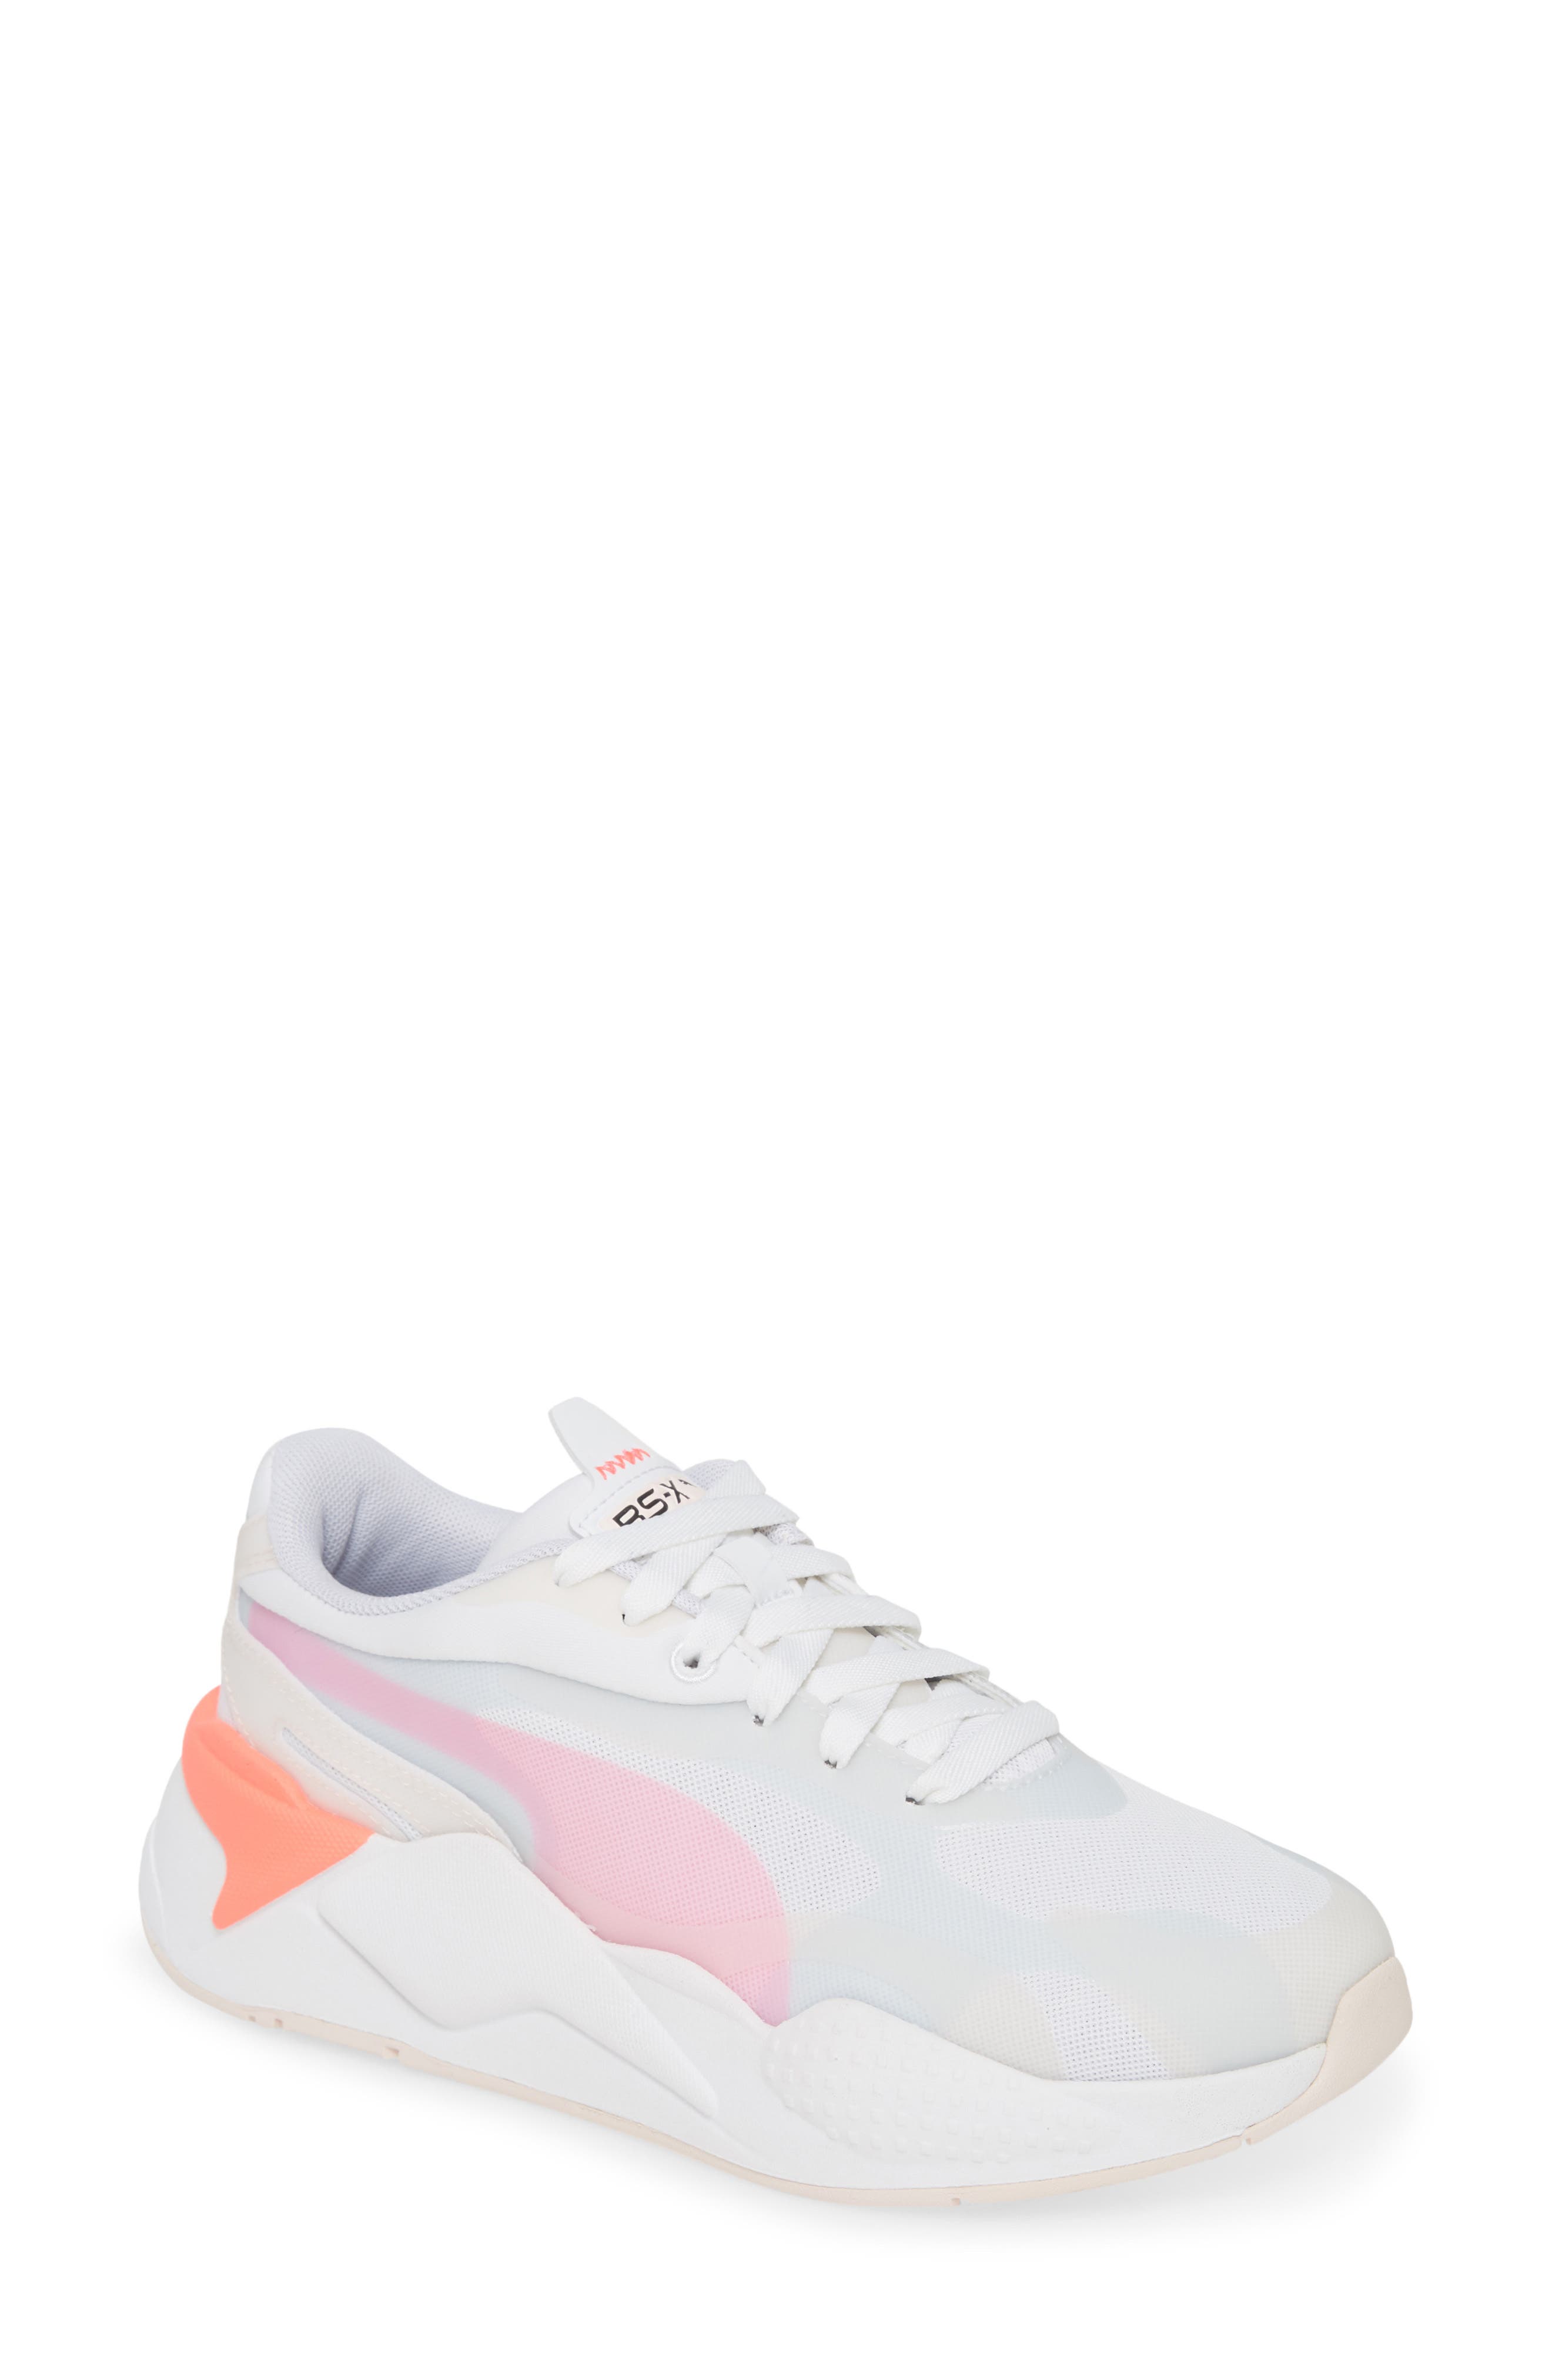 All Women's PUMA Clearance | Nordstrom